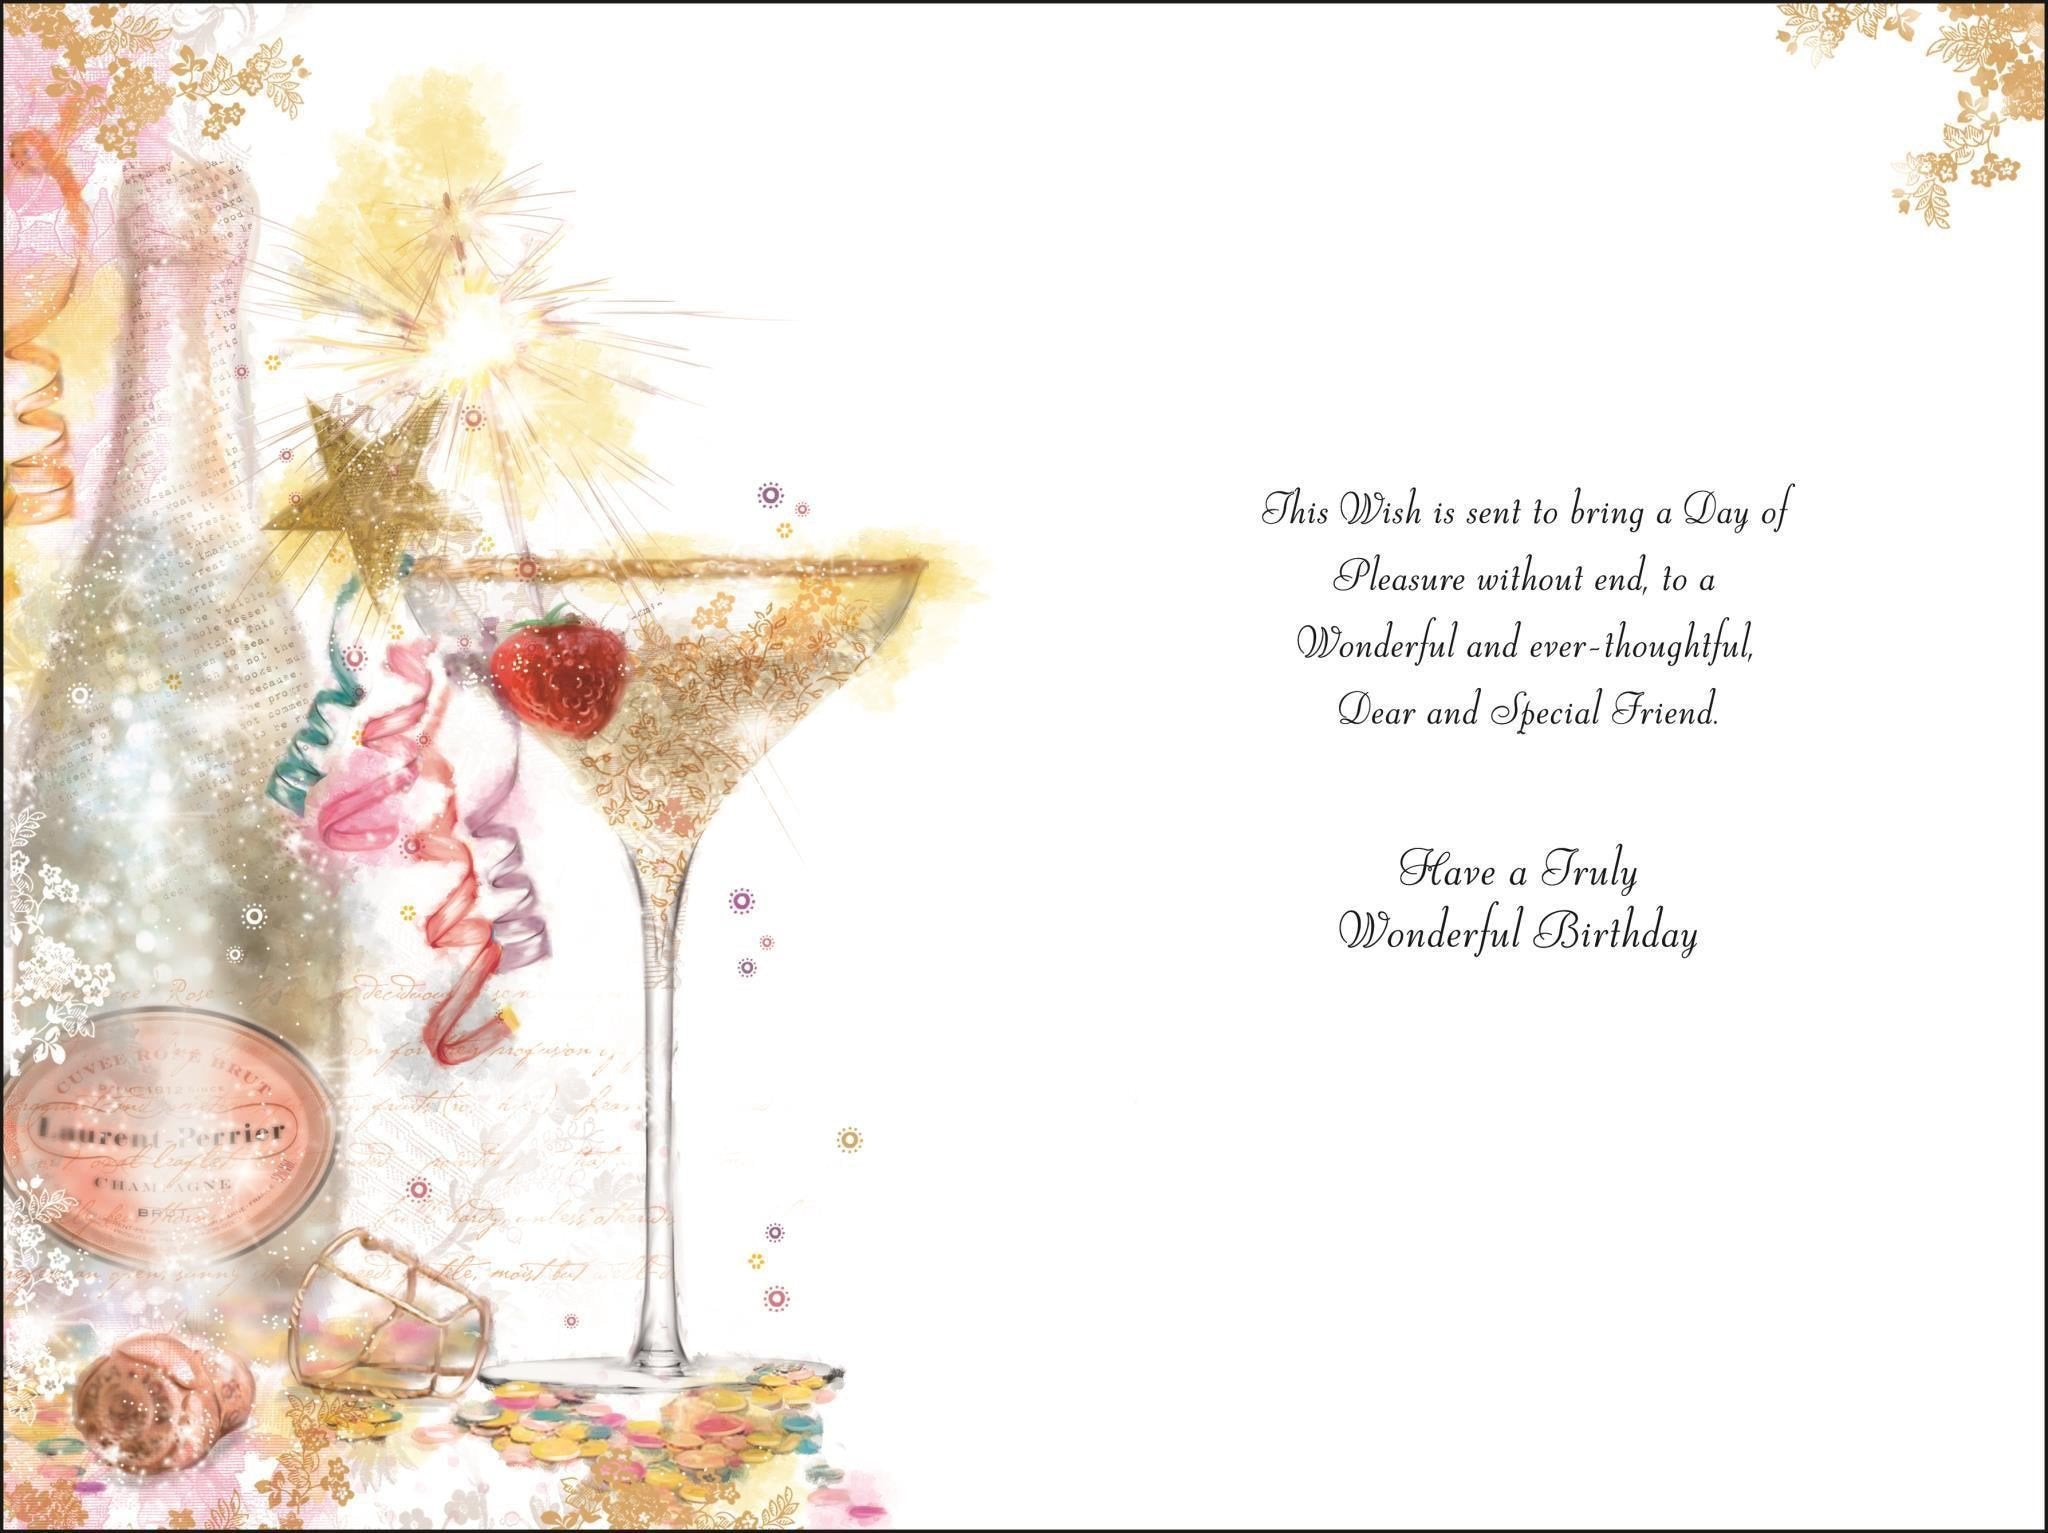 Inside of Special Friend Birthday Champagne Bottle Greetings Card